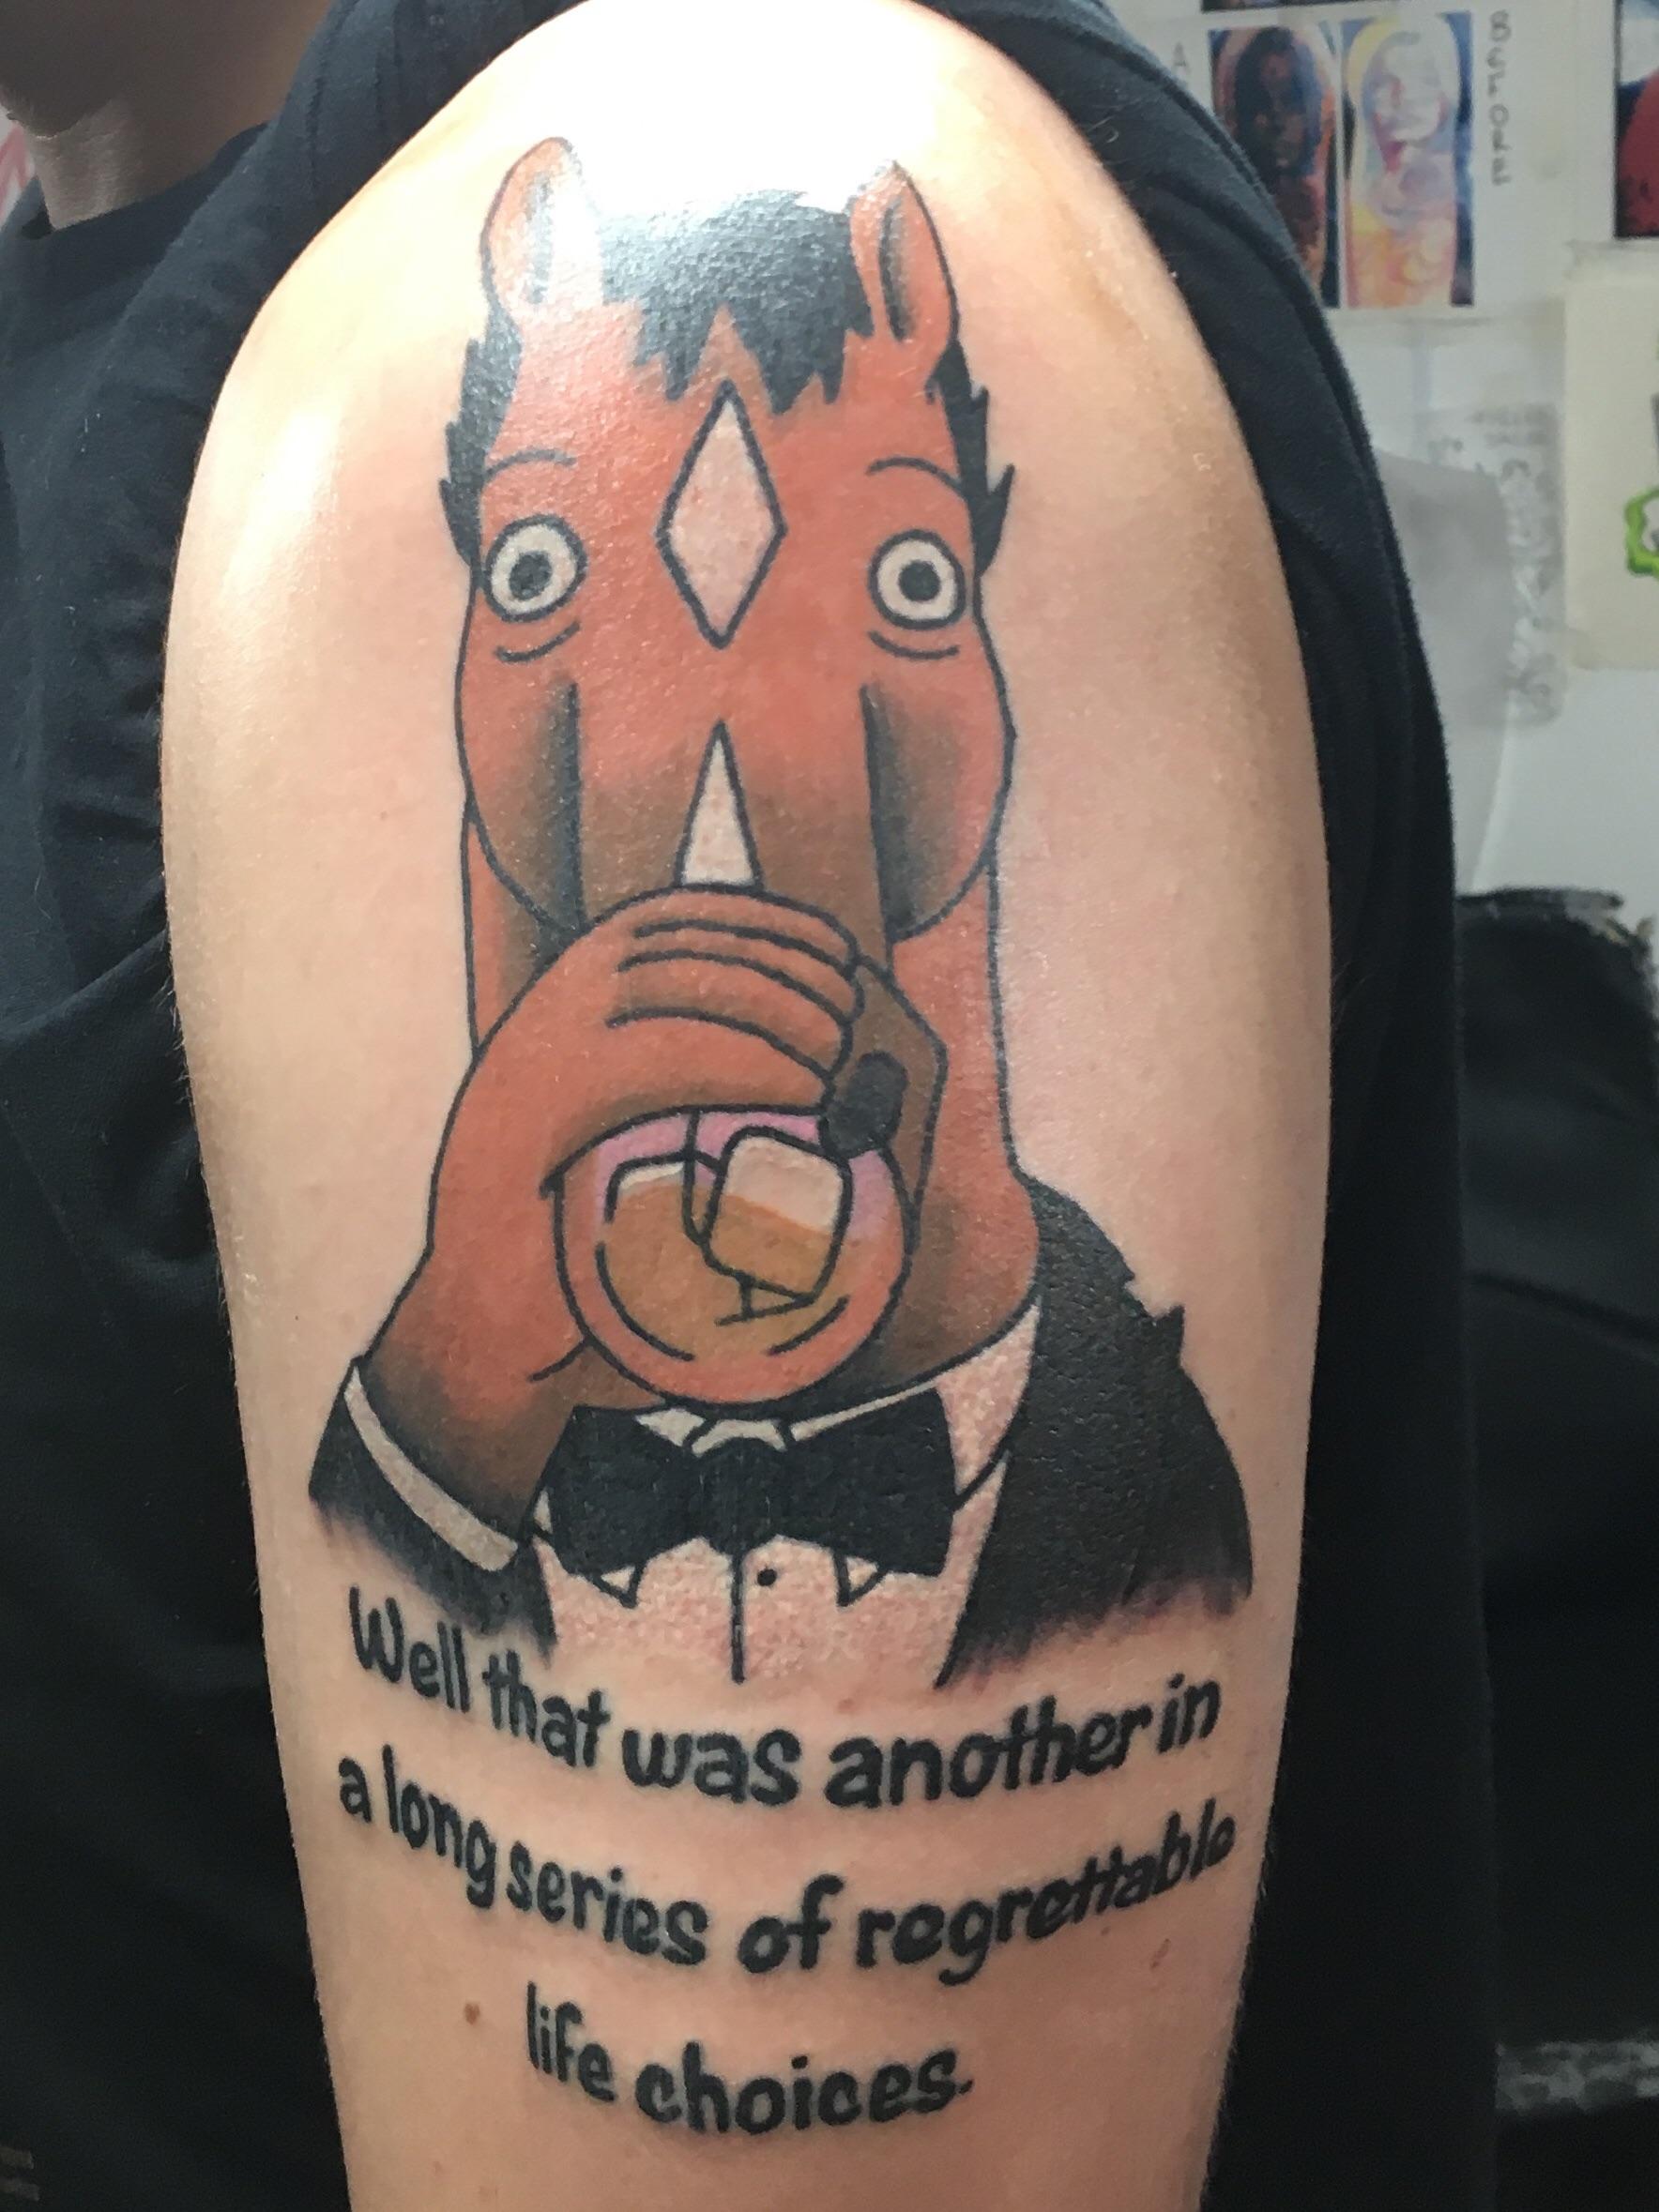 Which is your favourite Bojack Horseman inspired tattoo